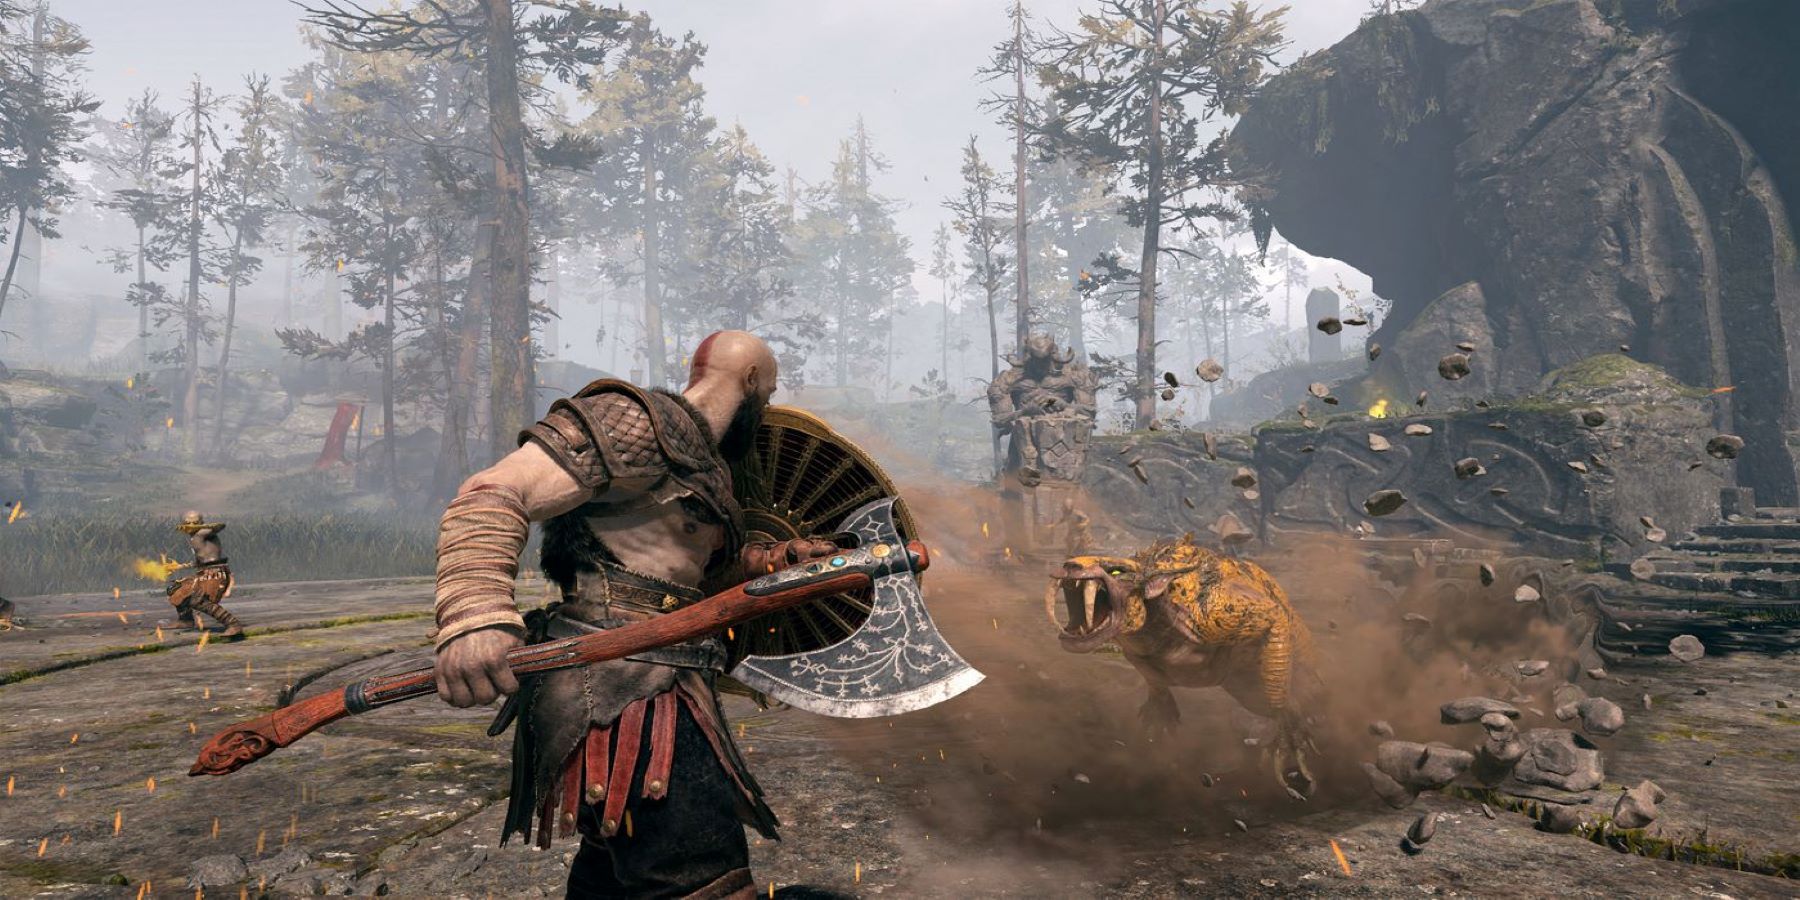 God of War PC Port Now Available to Pre-Load on Steam - Gameranx